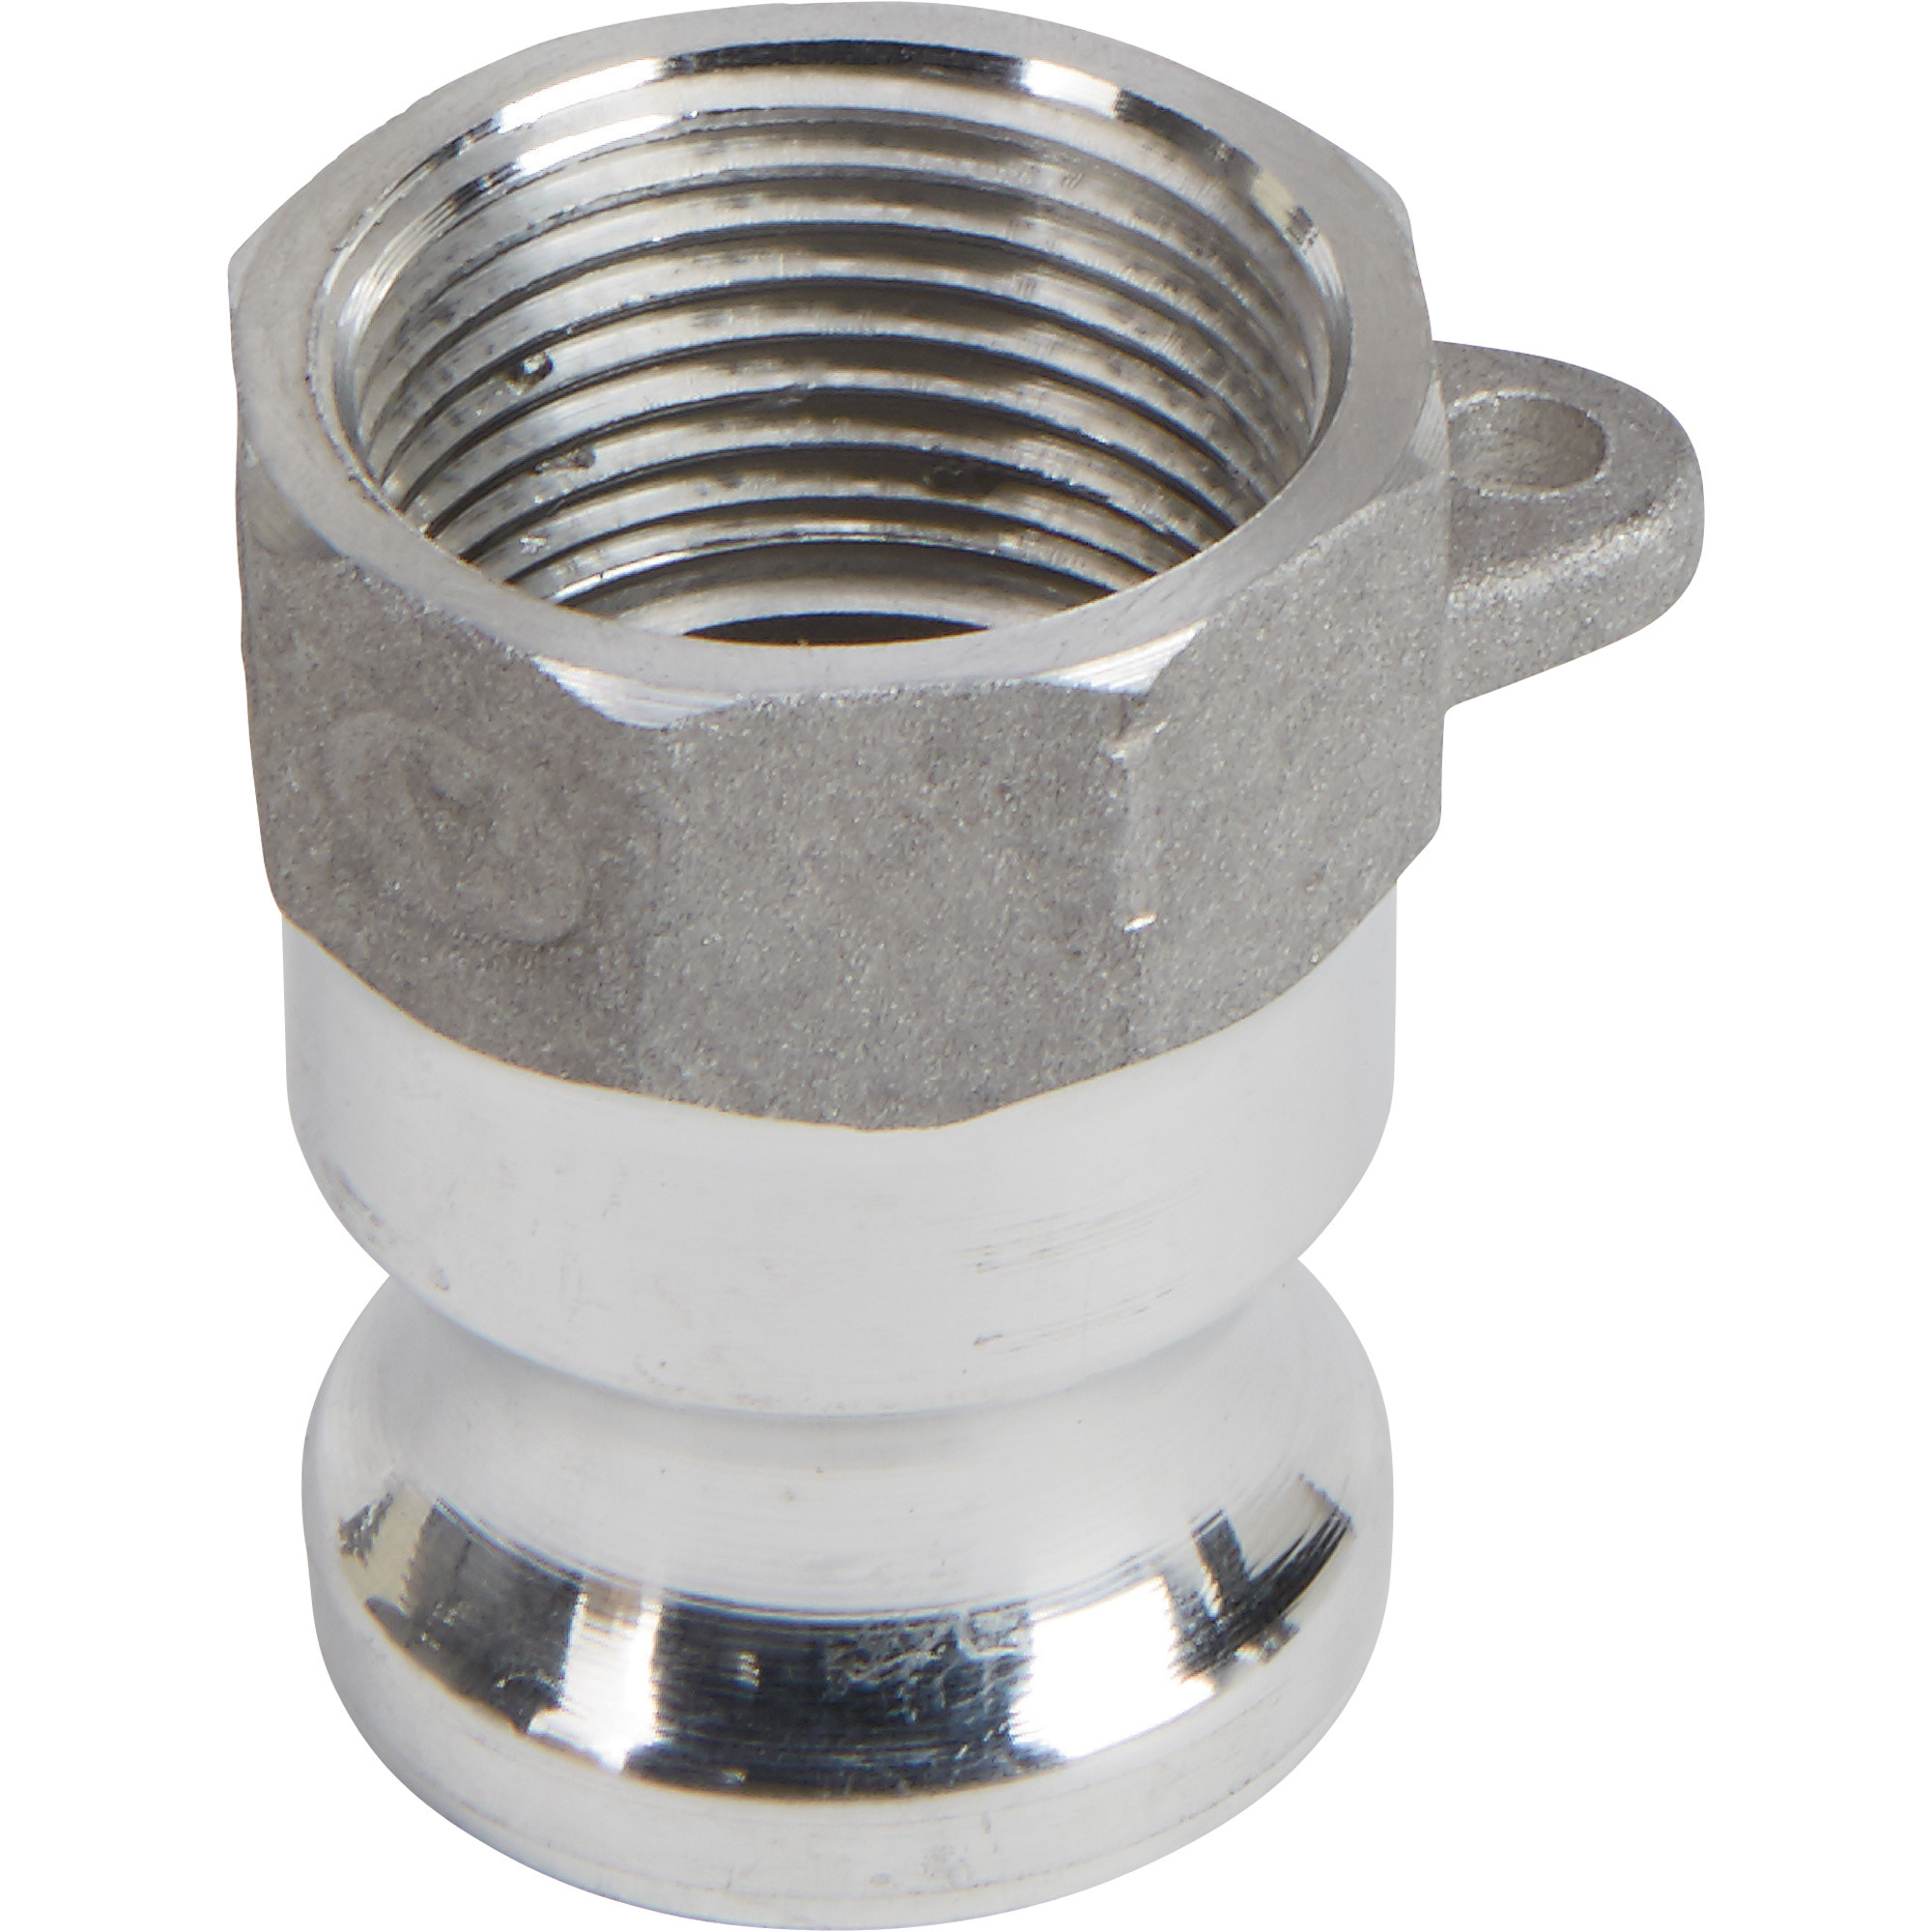 Strongway Aluminum Cam-Lock Fitting, 1in.FPT x Male | Northern Tool